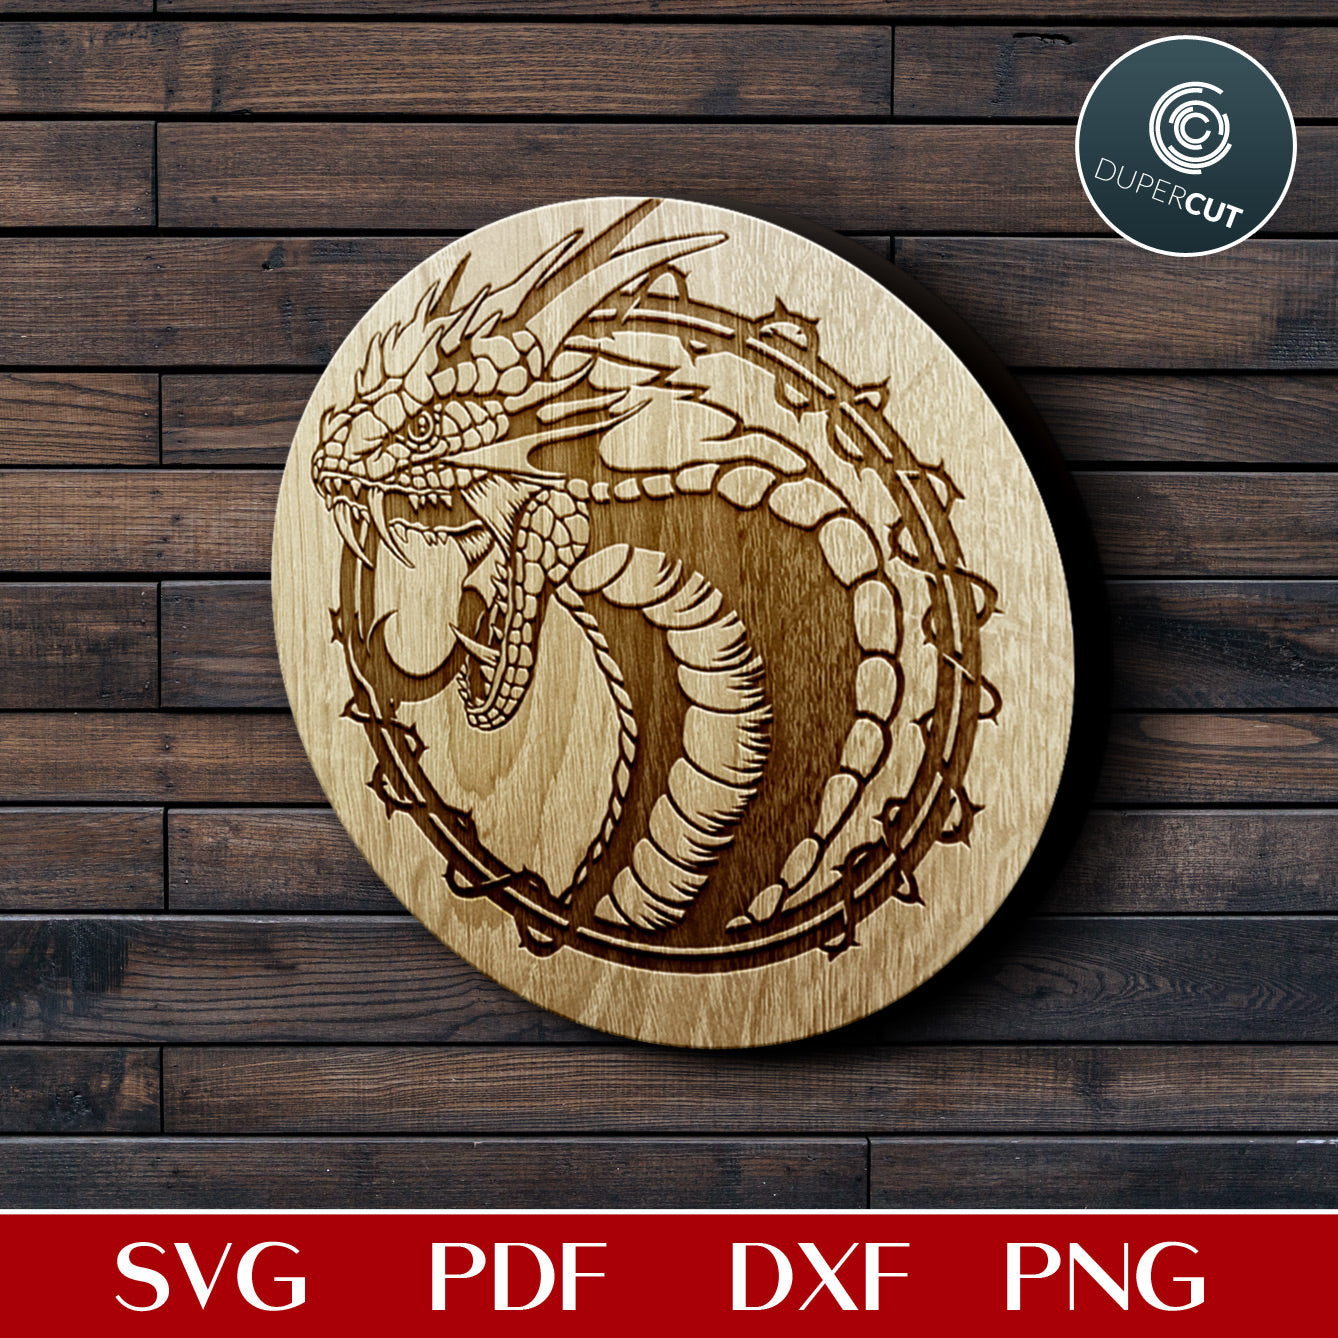 Angry dragon steampunk illustration - SVG PDF PNG vector files for paper engraving, laser cutting machines, Cricut, Silhouette Cameo, Glowforge